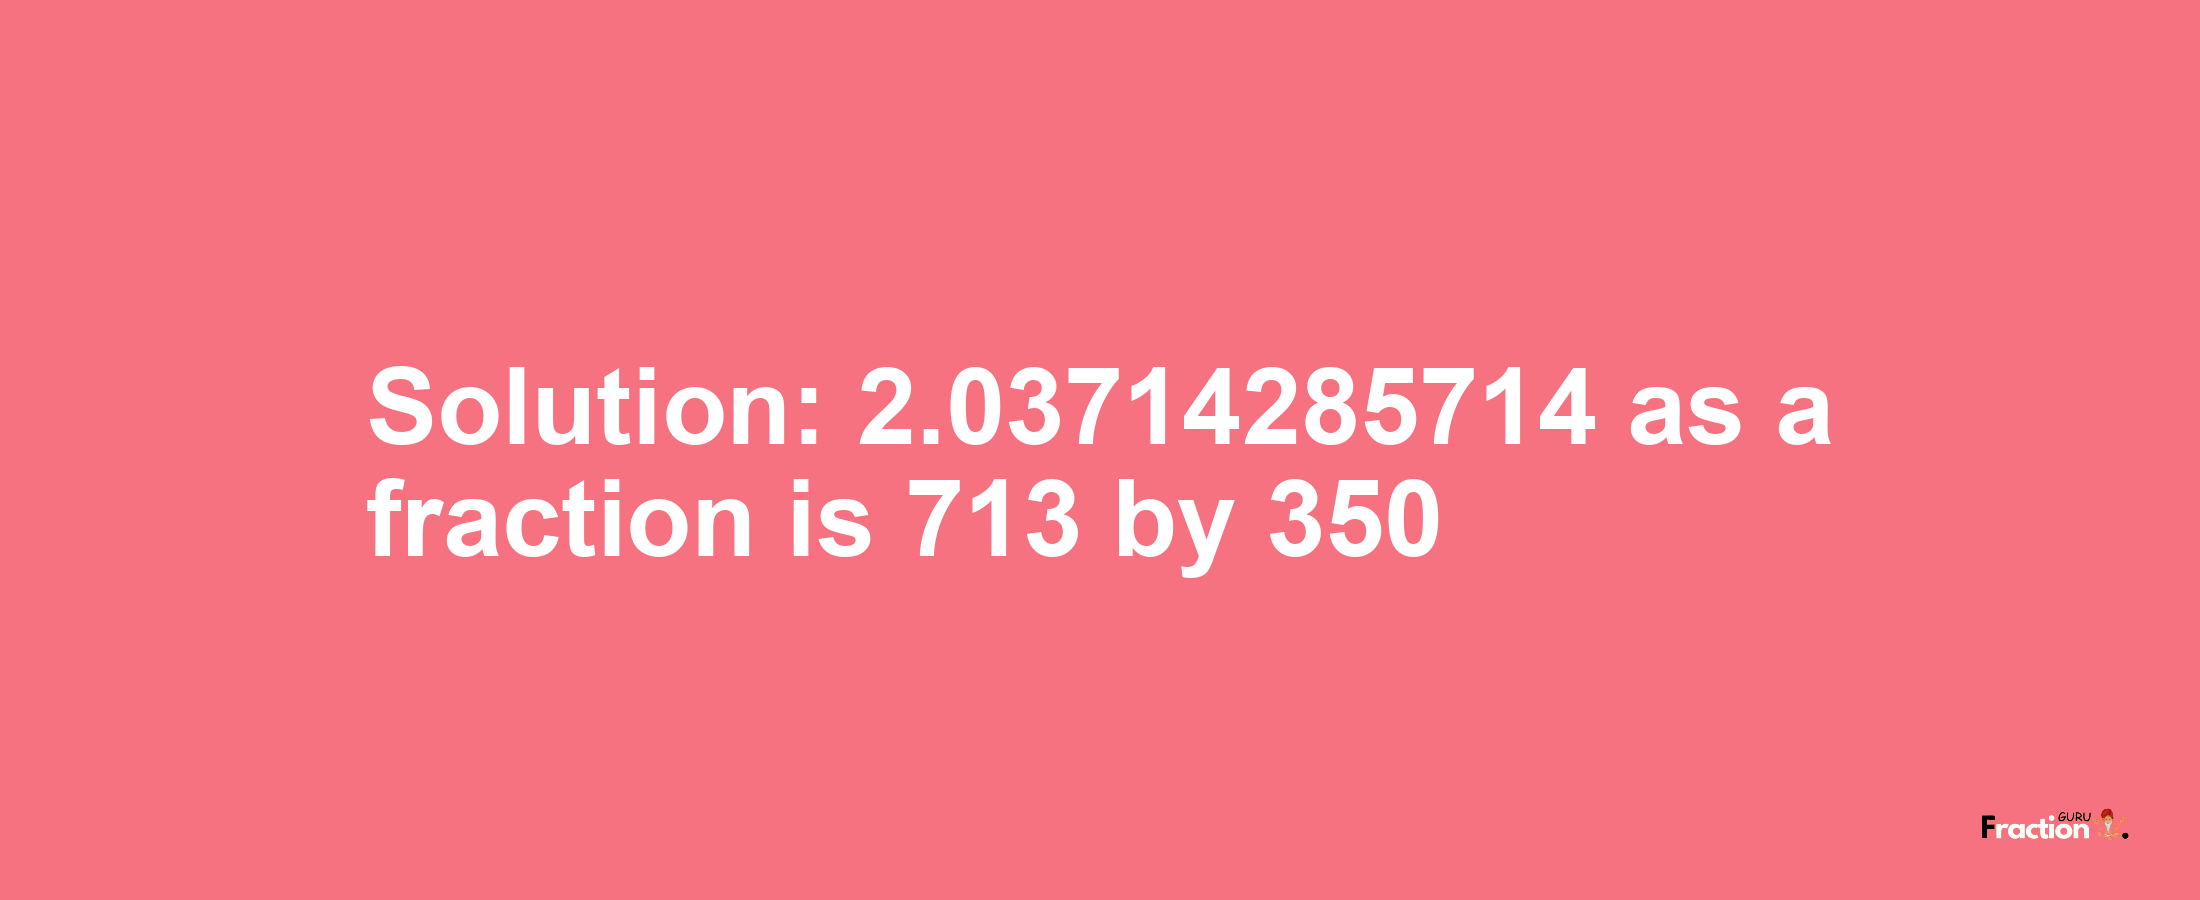 Solution:2.03714285714 as a fraction is 713/350